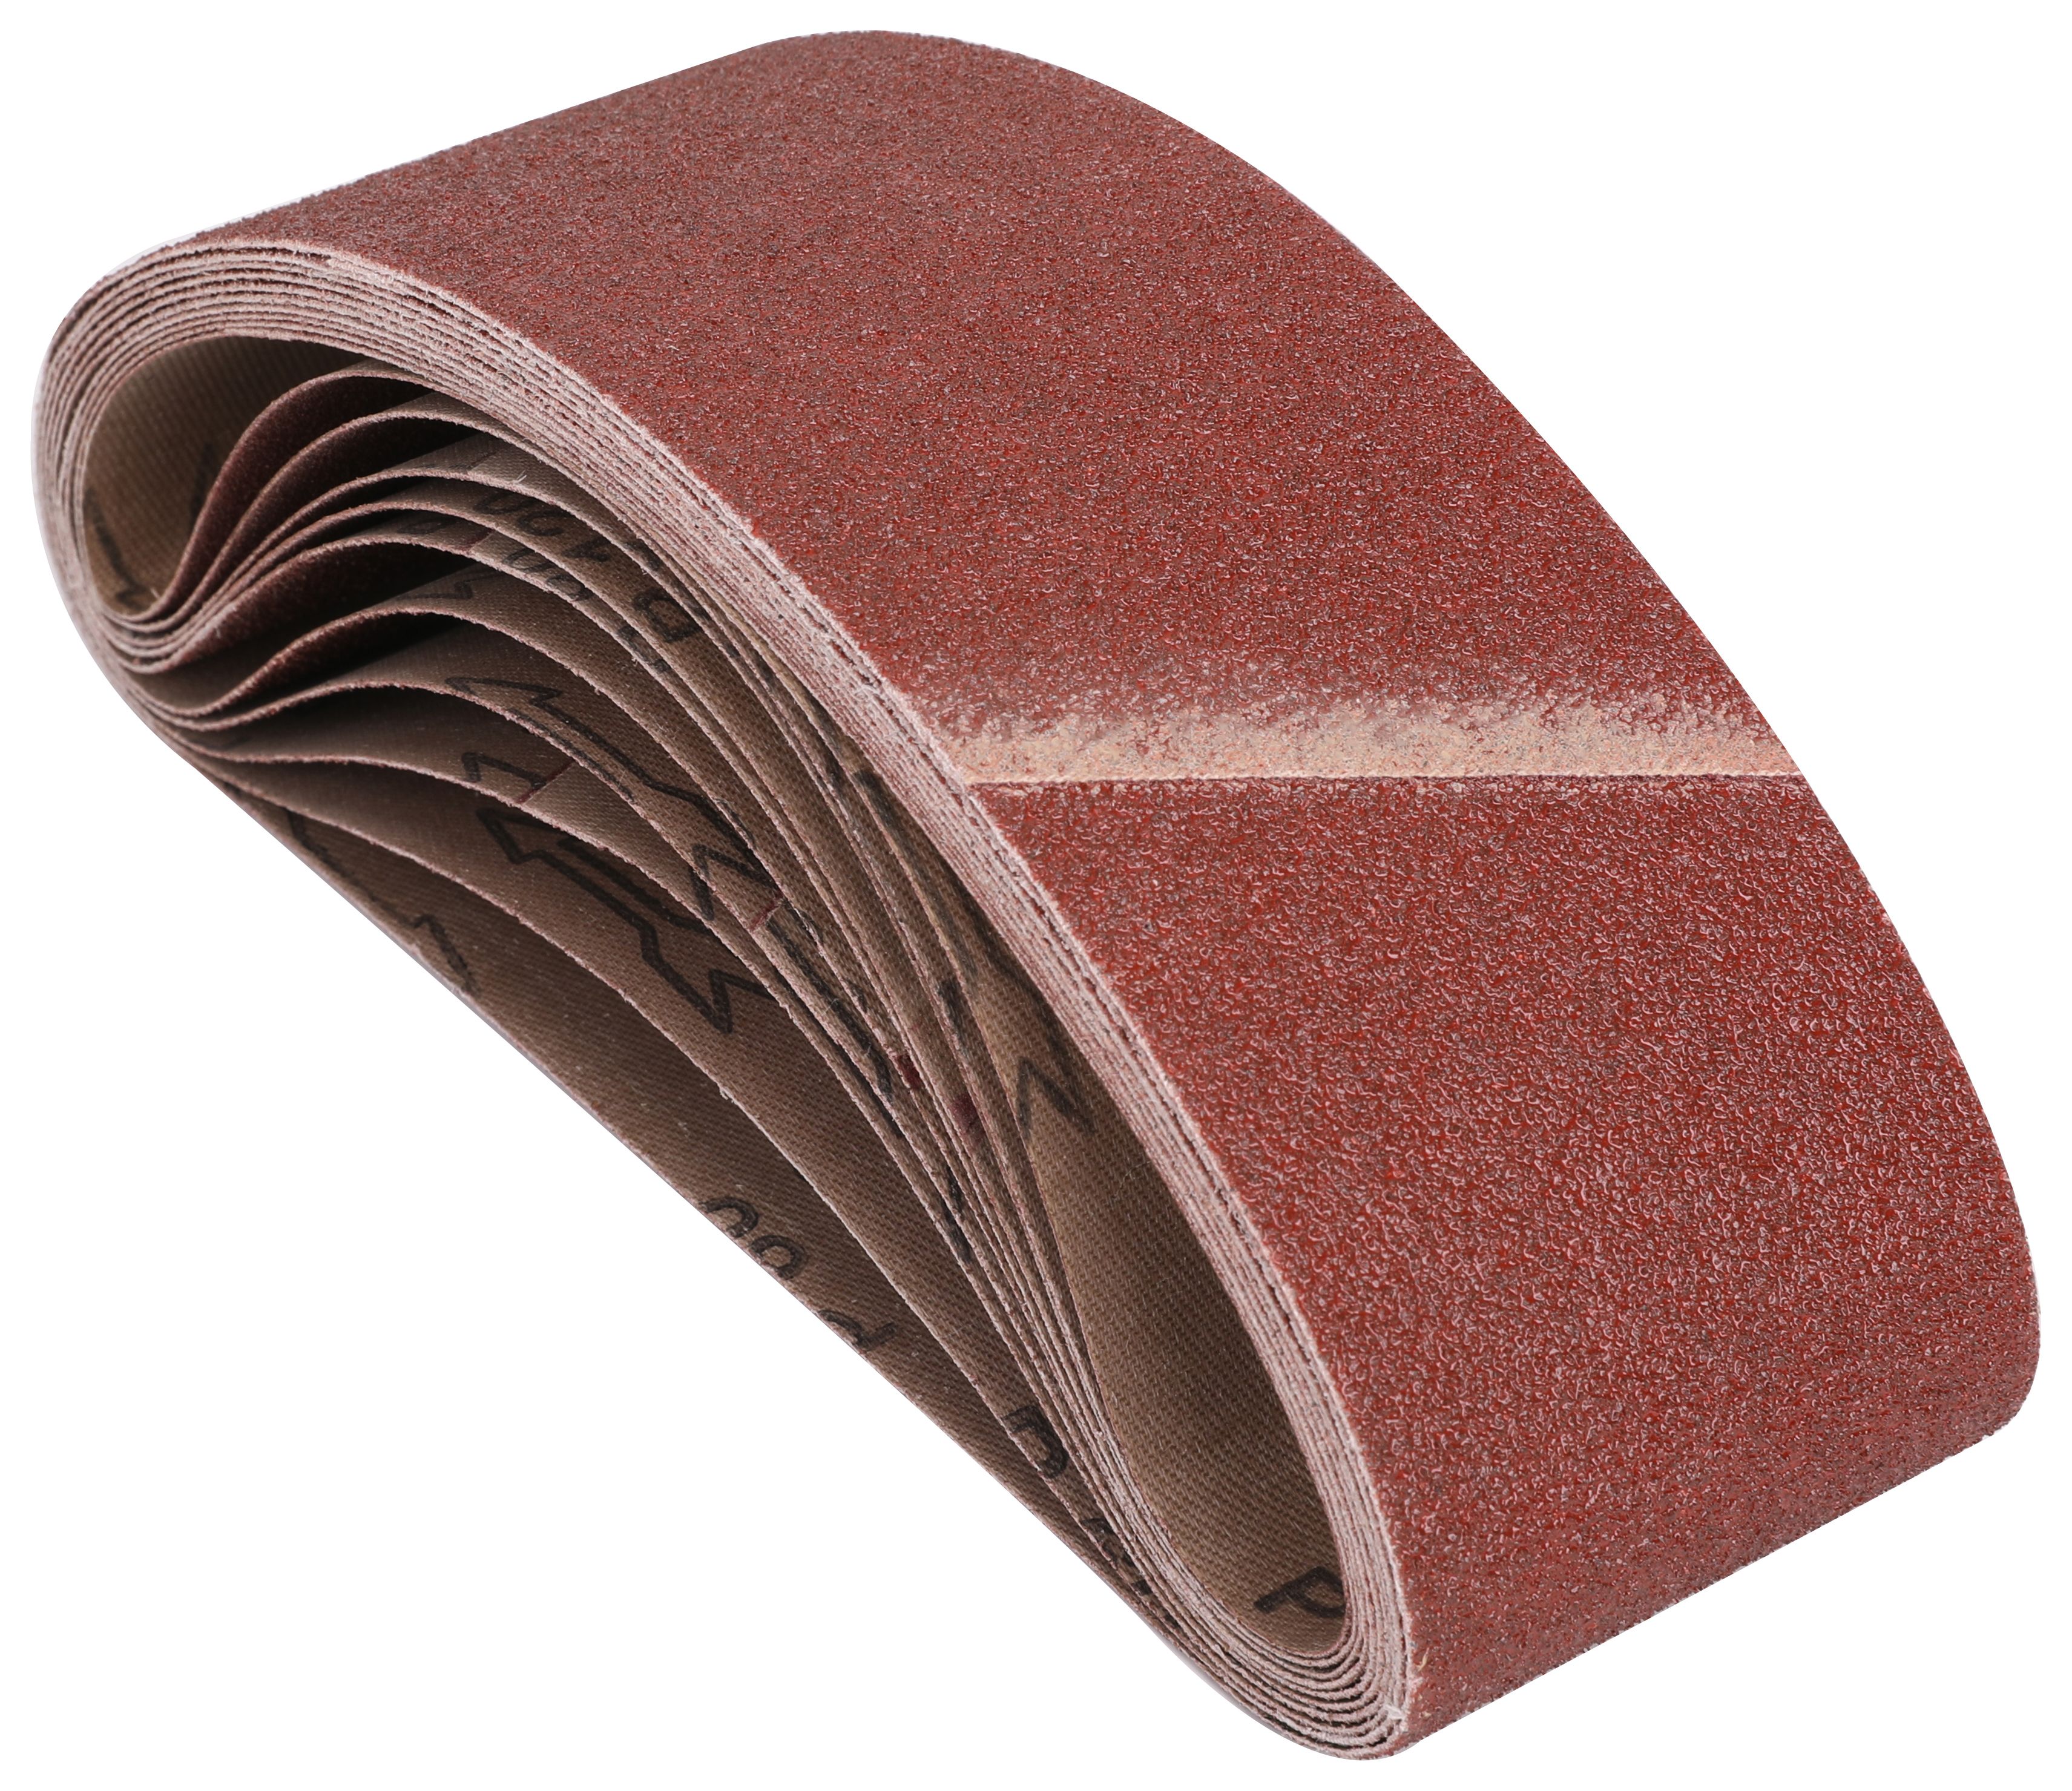 Image of Wickes Assorted 75 x 533mm Sanding Belts - Pack of 10